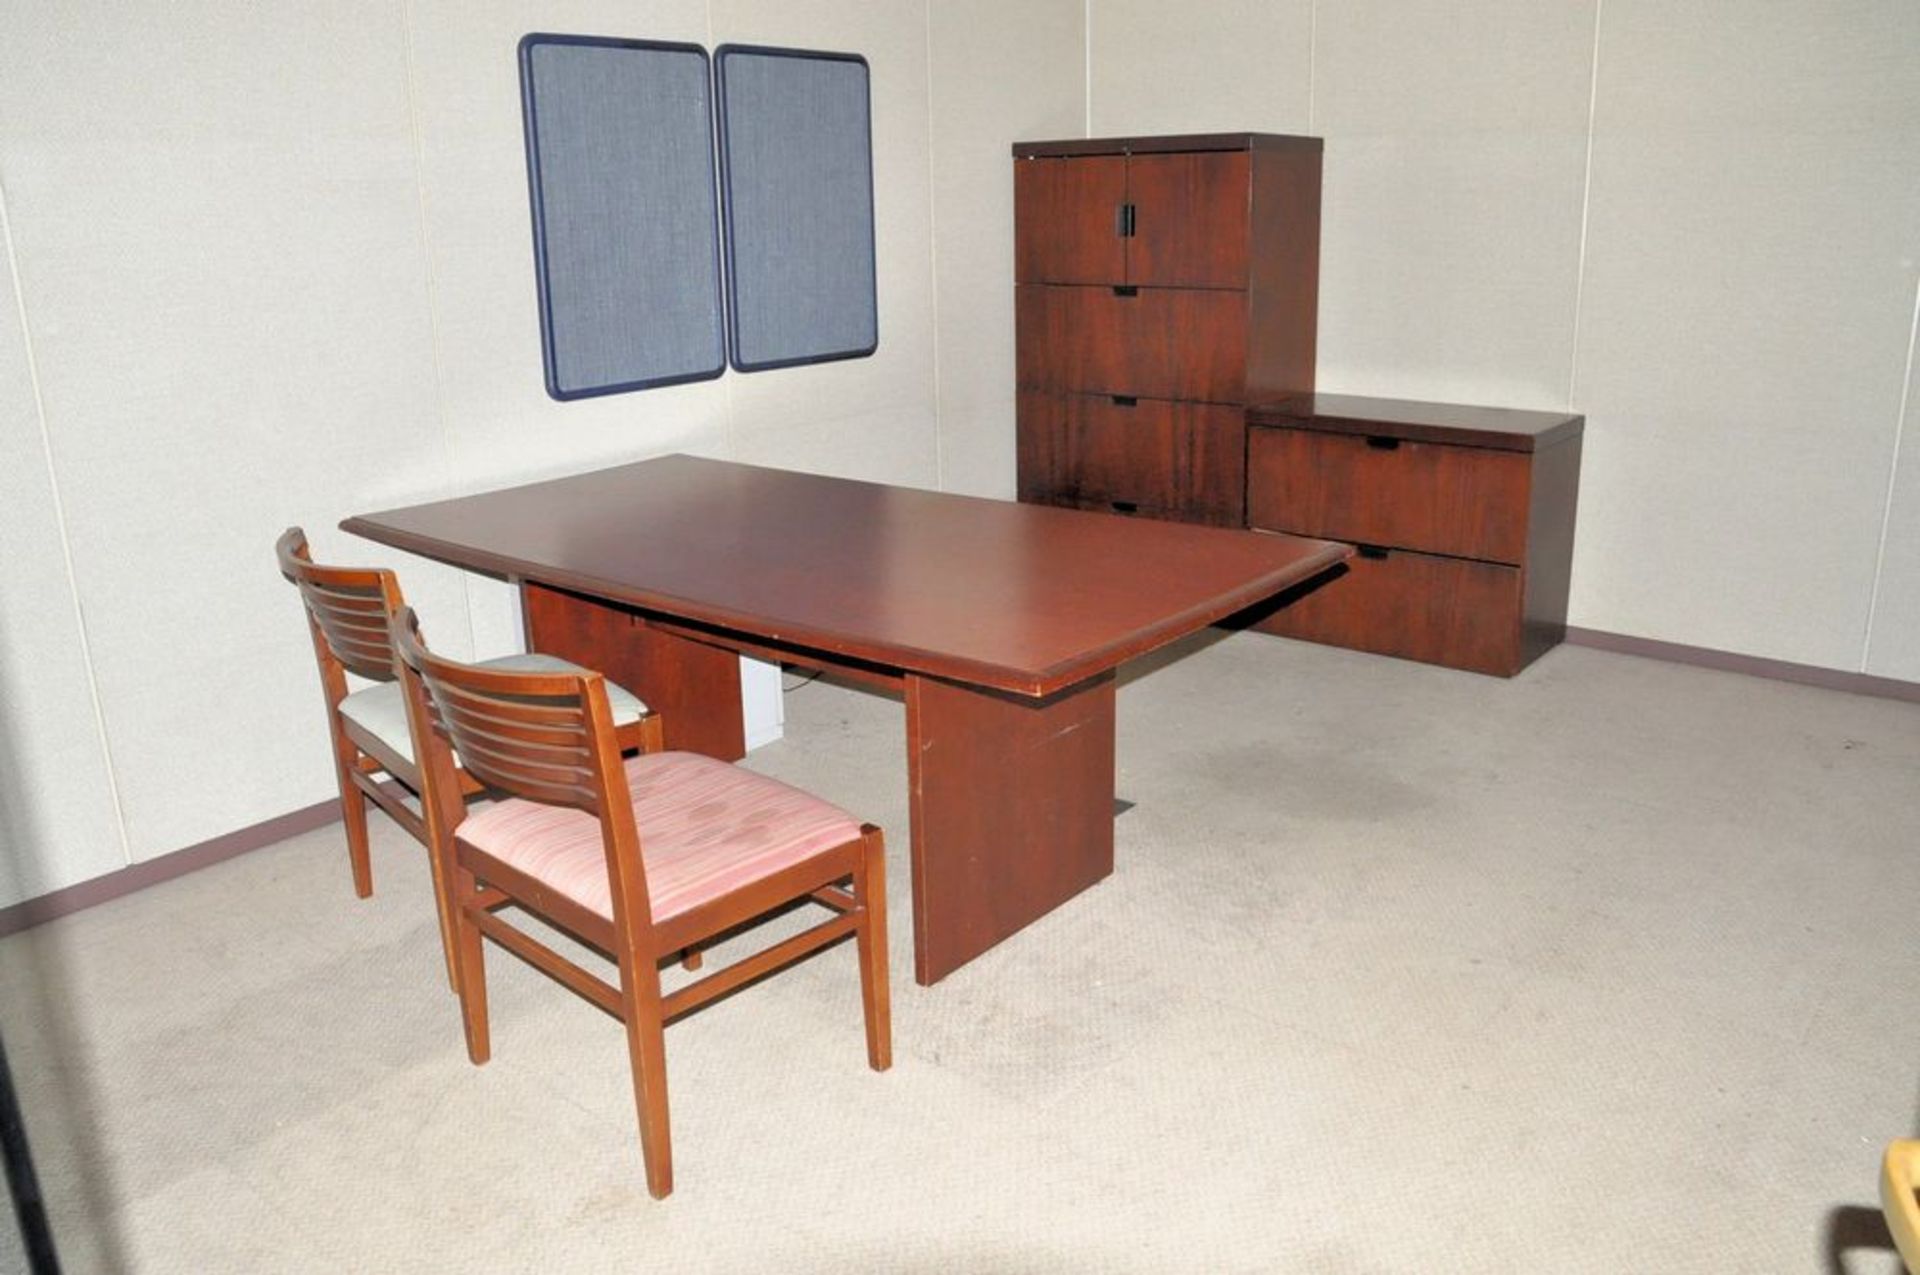 Lot-(1) Desk, (2) Lateral File Cabinets, (1) Bookcase, (2) Chairs and (1) Dry Erase Board in (1)